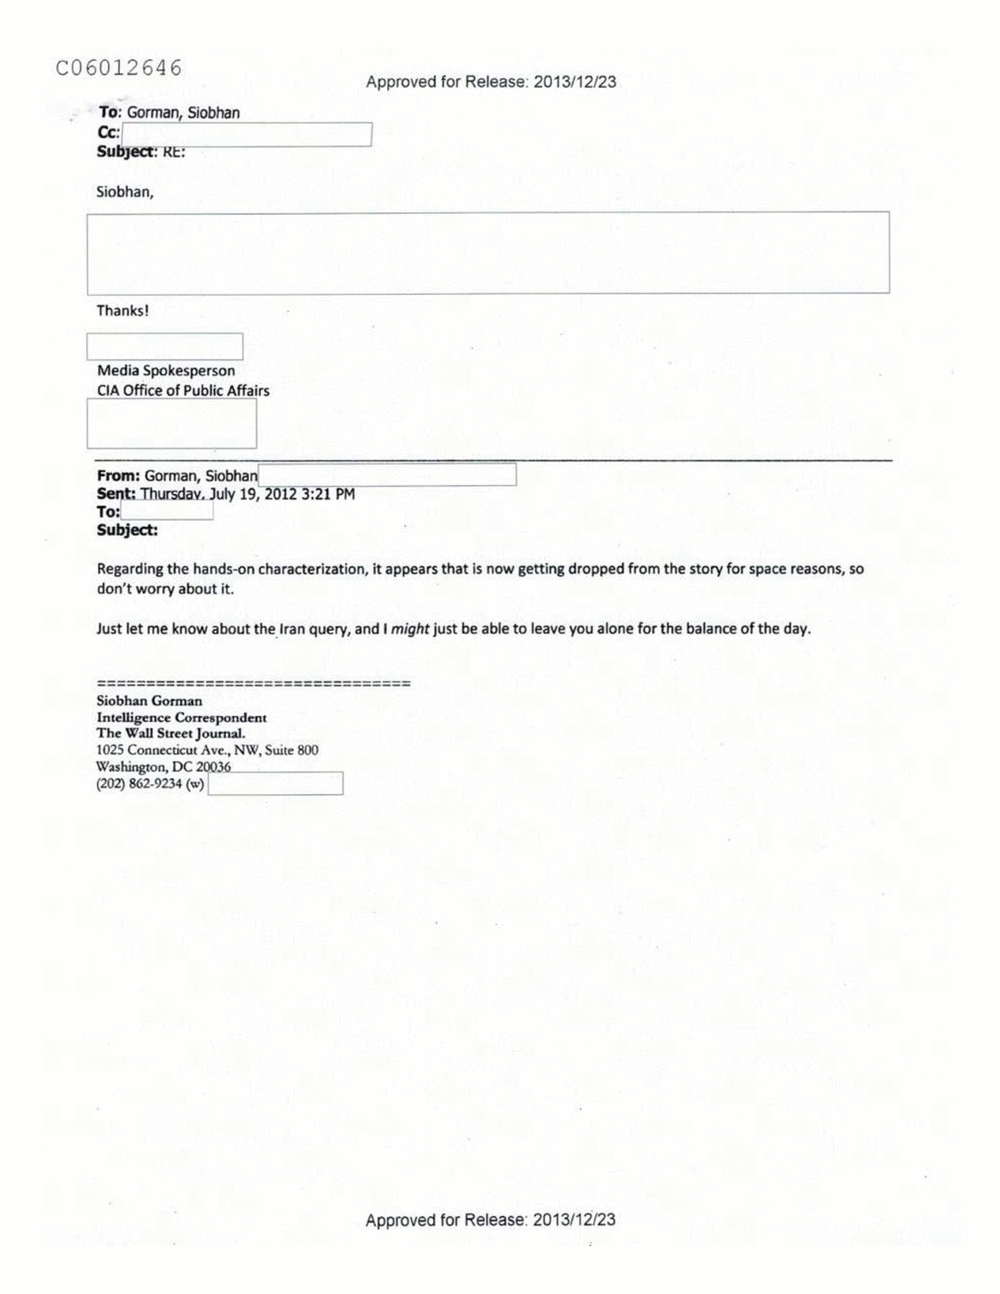 Page 217 from Email Correspondence Between Reporters and CIA Flacks